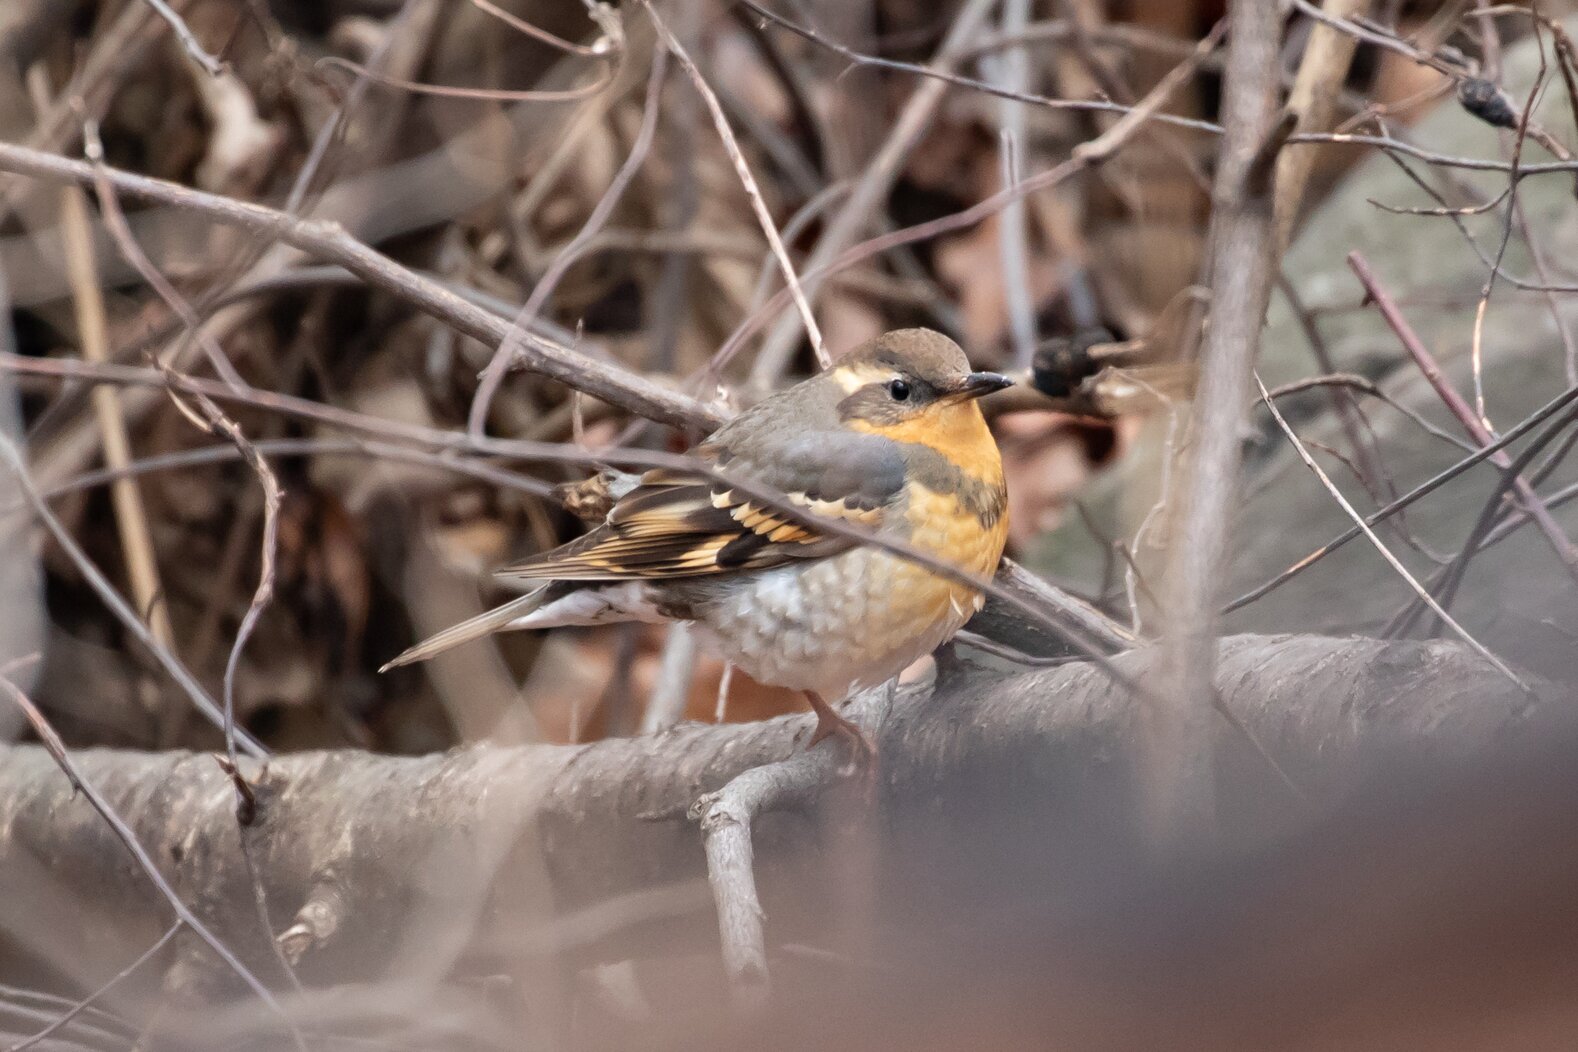 A Varied Thrush, native to western North America, is among the rarities that have shown up in Prospect Park in recent years. Photo: Ryan F. Mandelbaum